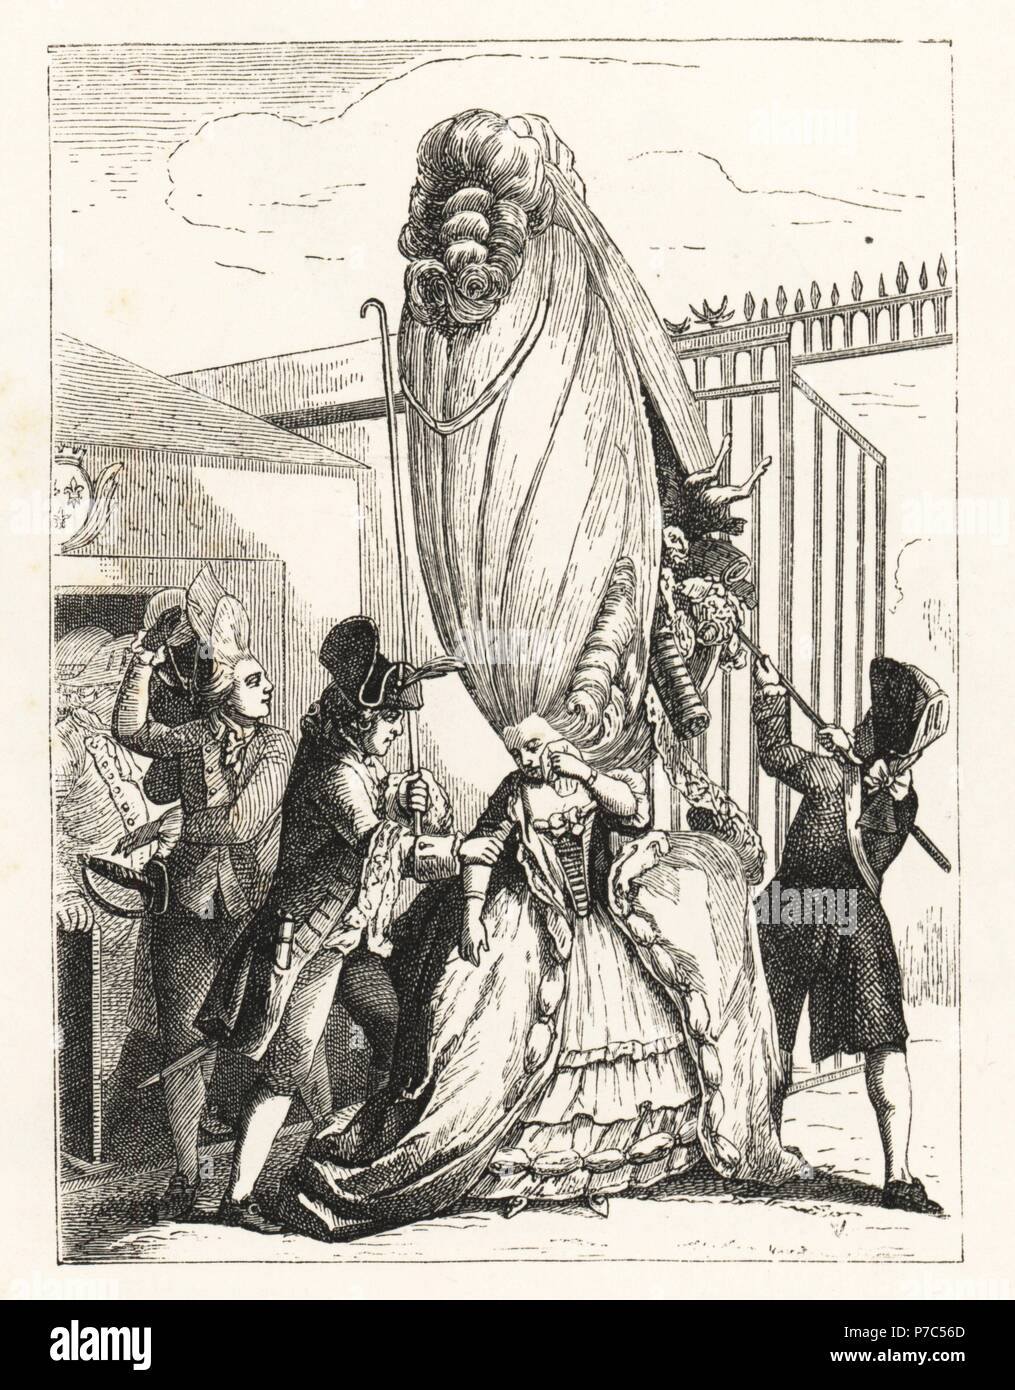 Woman smuggling contraband into France in her massive wig. 18th century caricature. Lithograph from Paul Lacroix' The Eighteenth Century: Its Institutions, Customs, and Costumes, London, 1876. Stock Photo